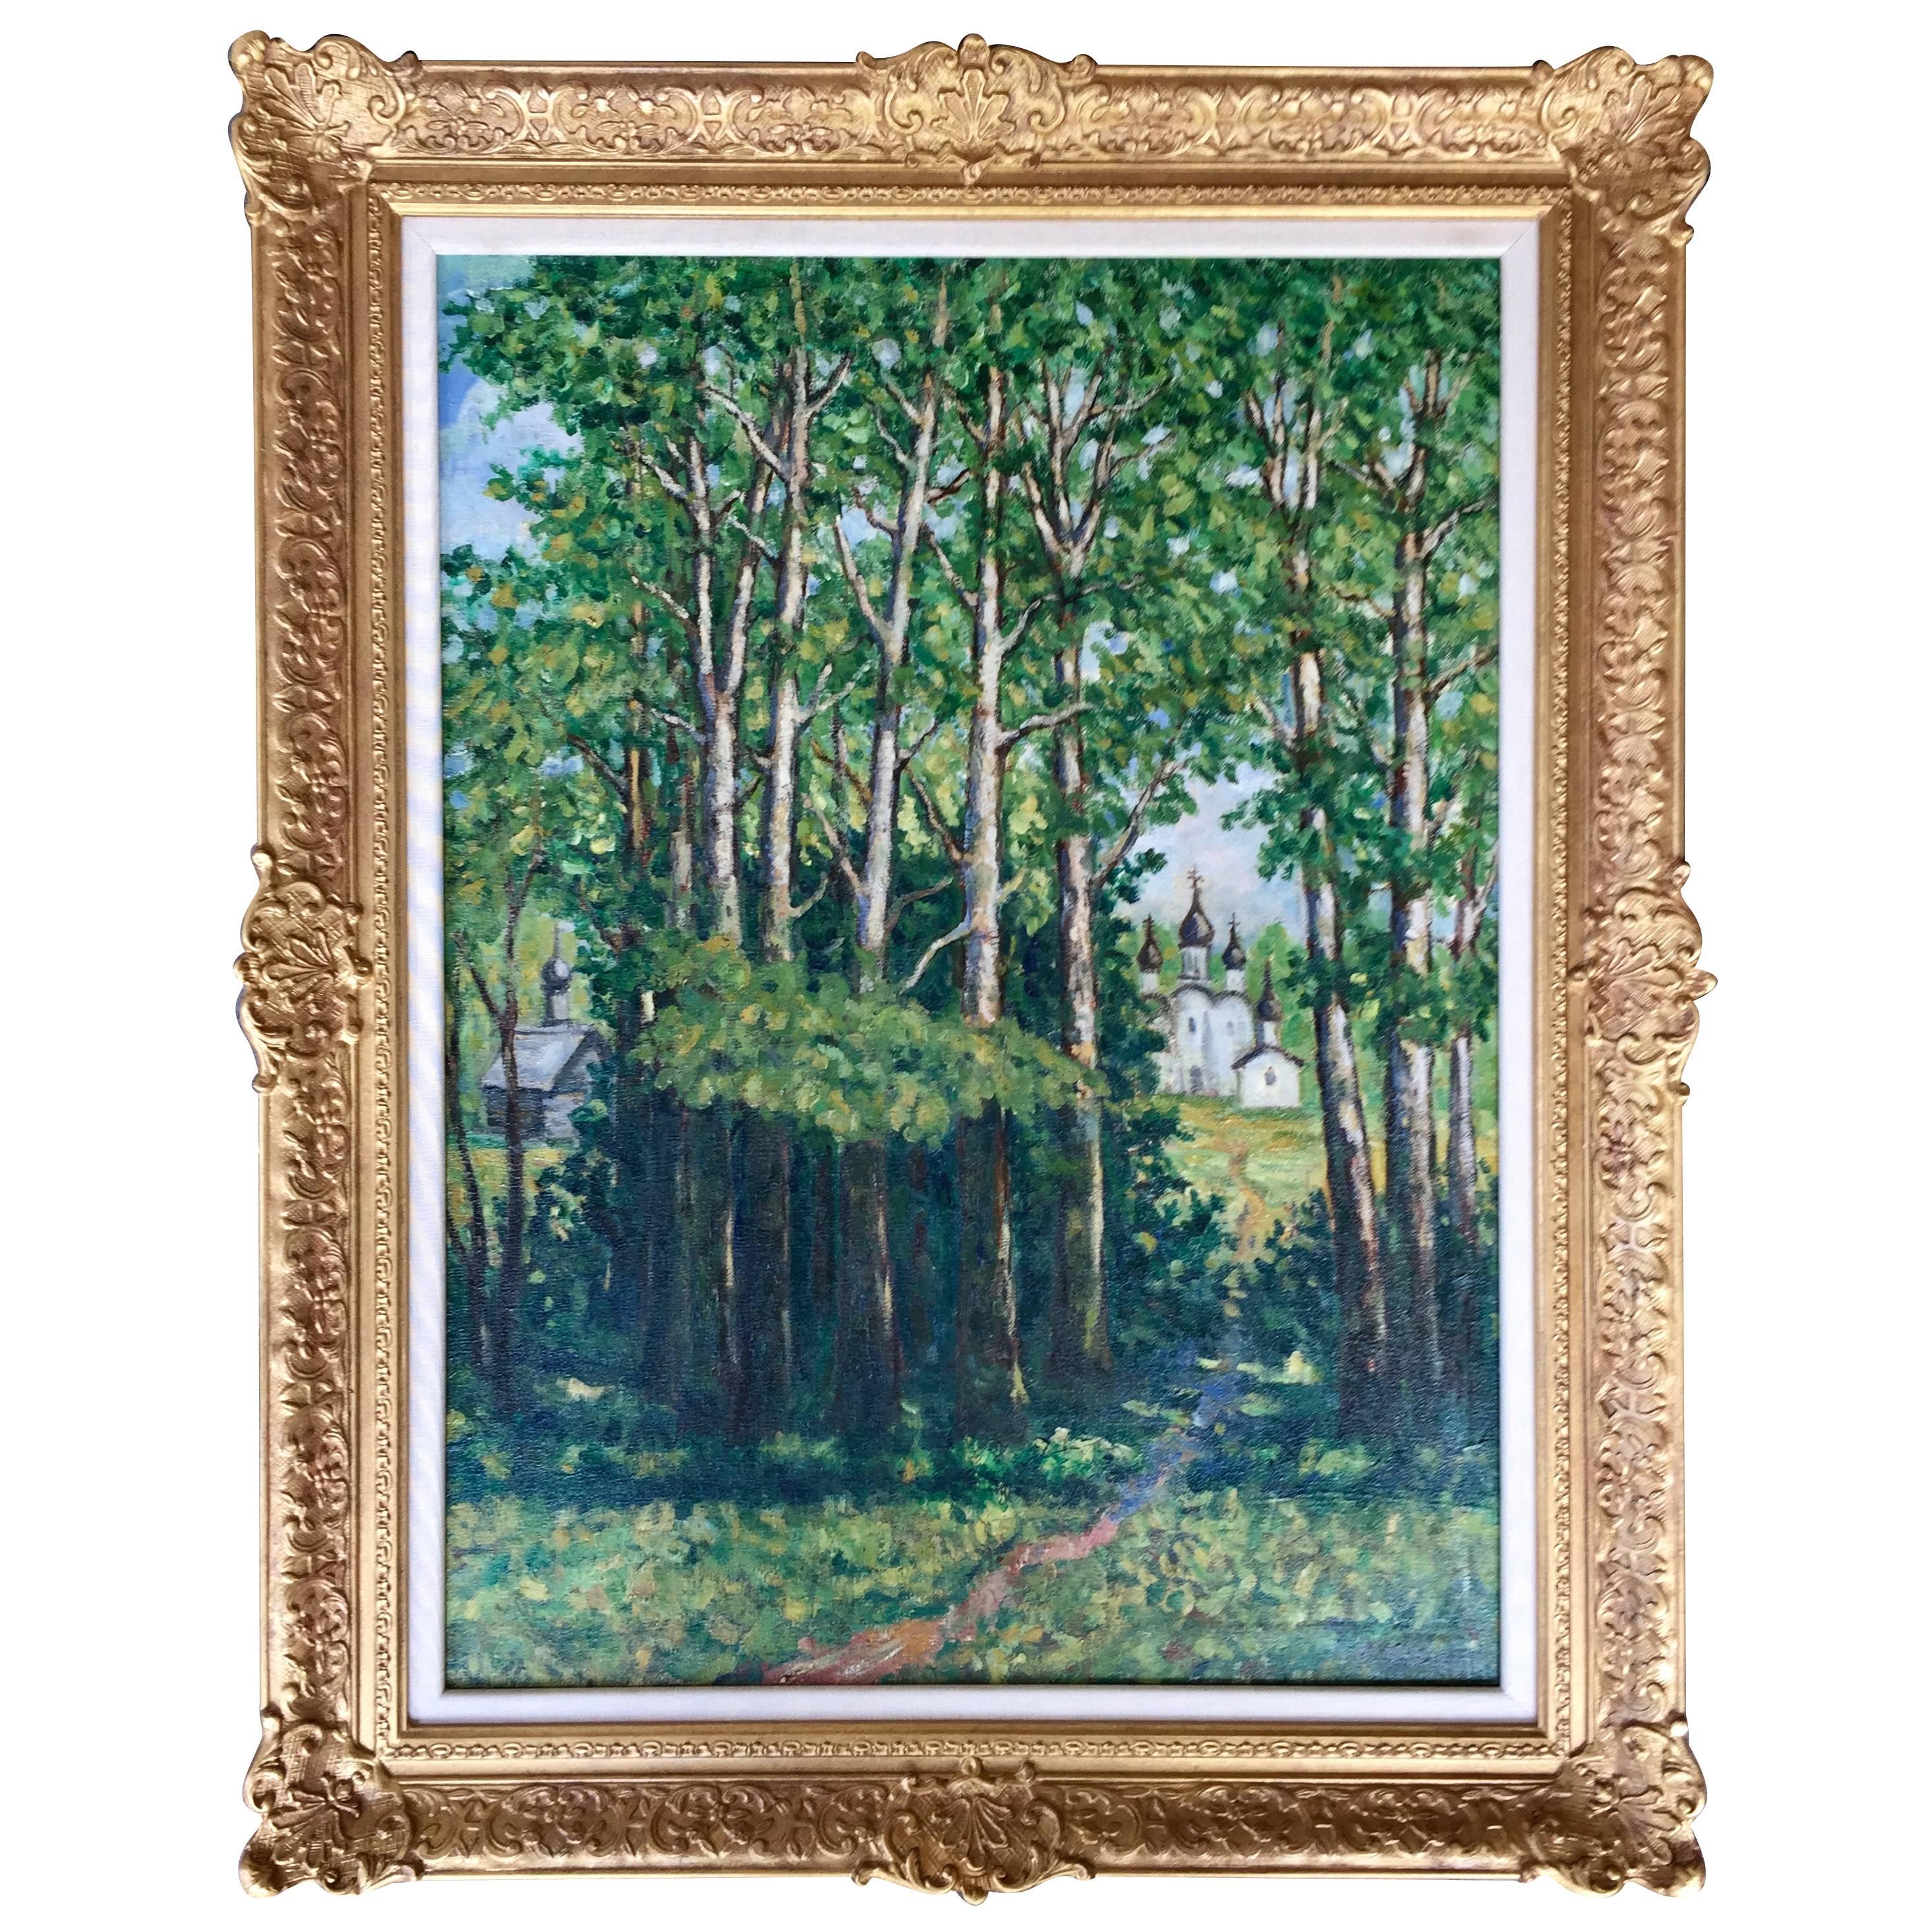 "Birch Forest with Path to Church" Painting by Alexander Kuprin